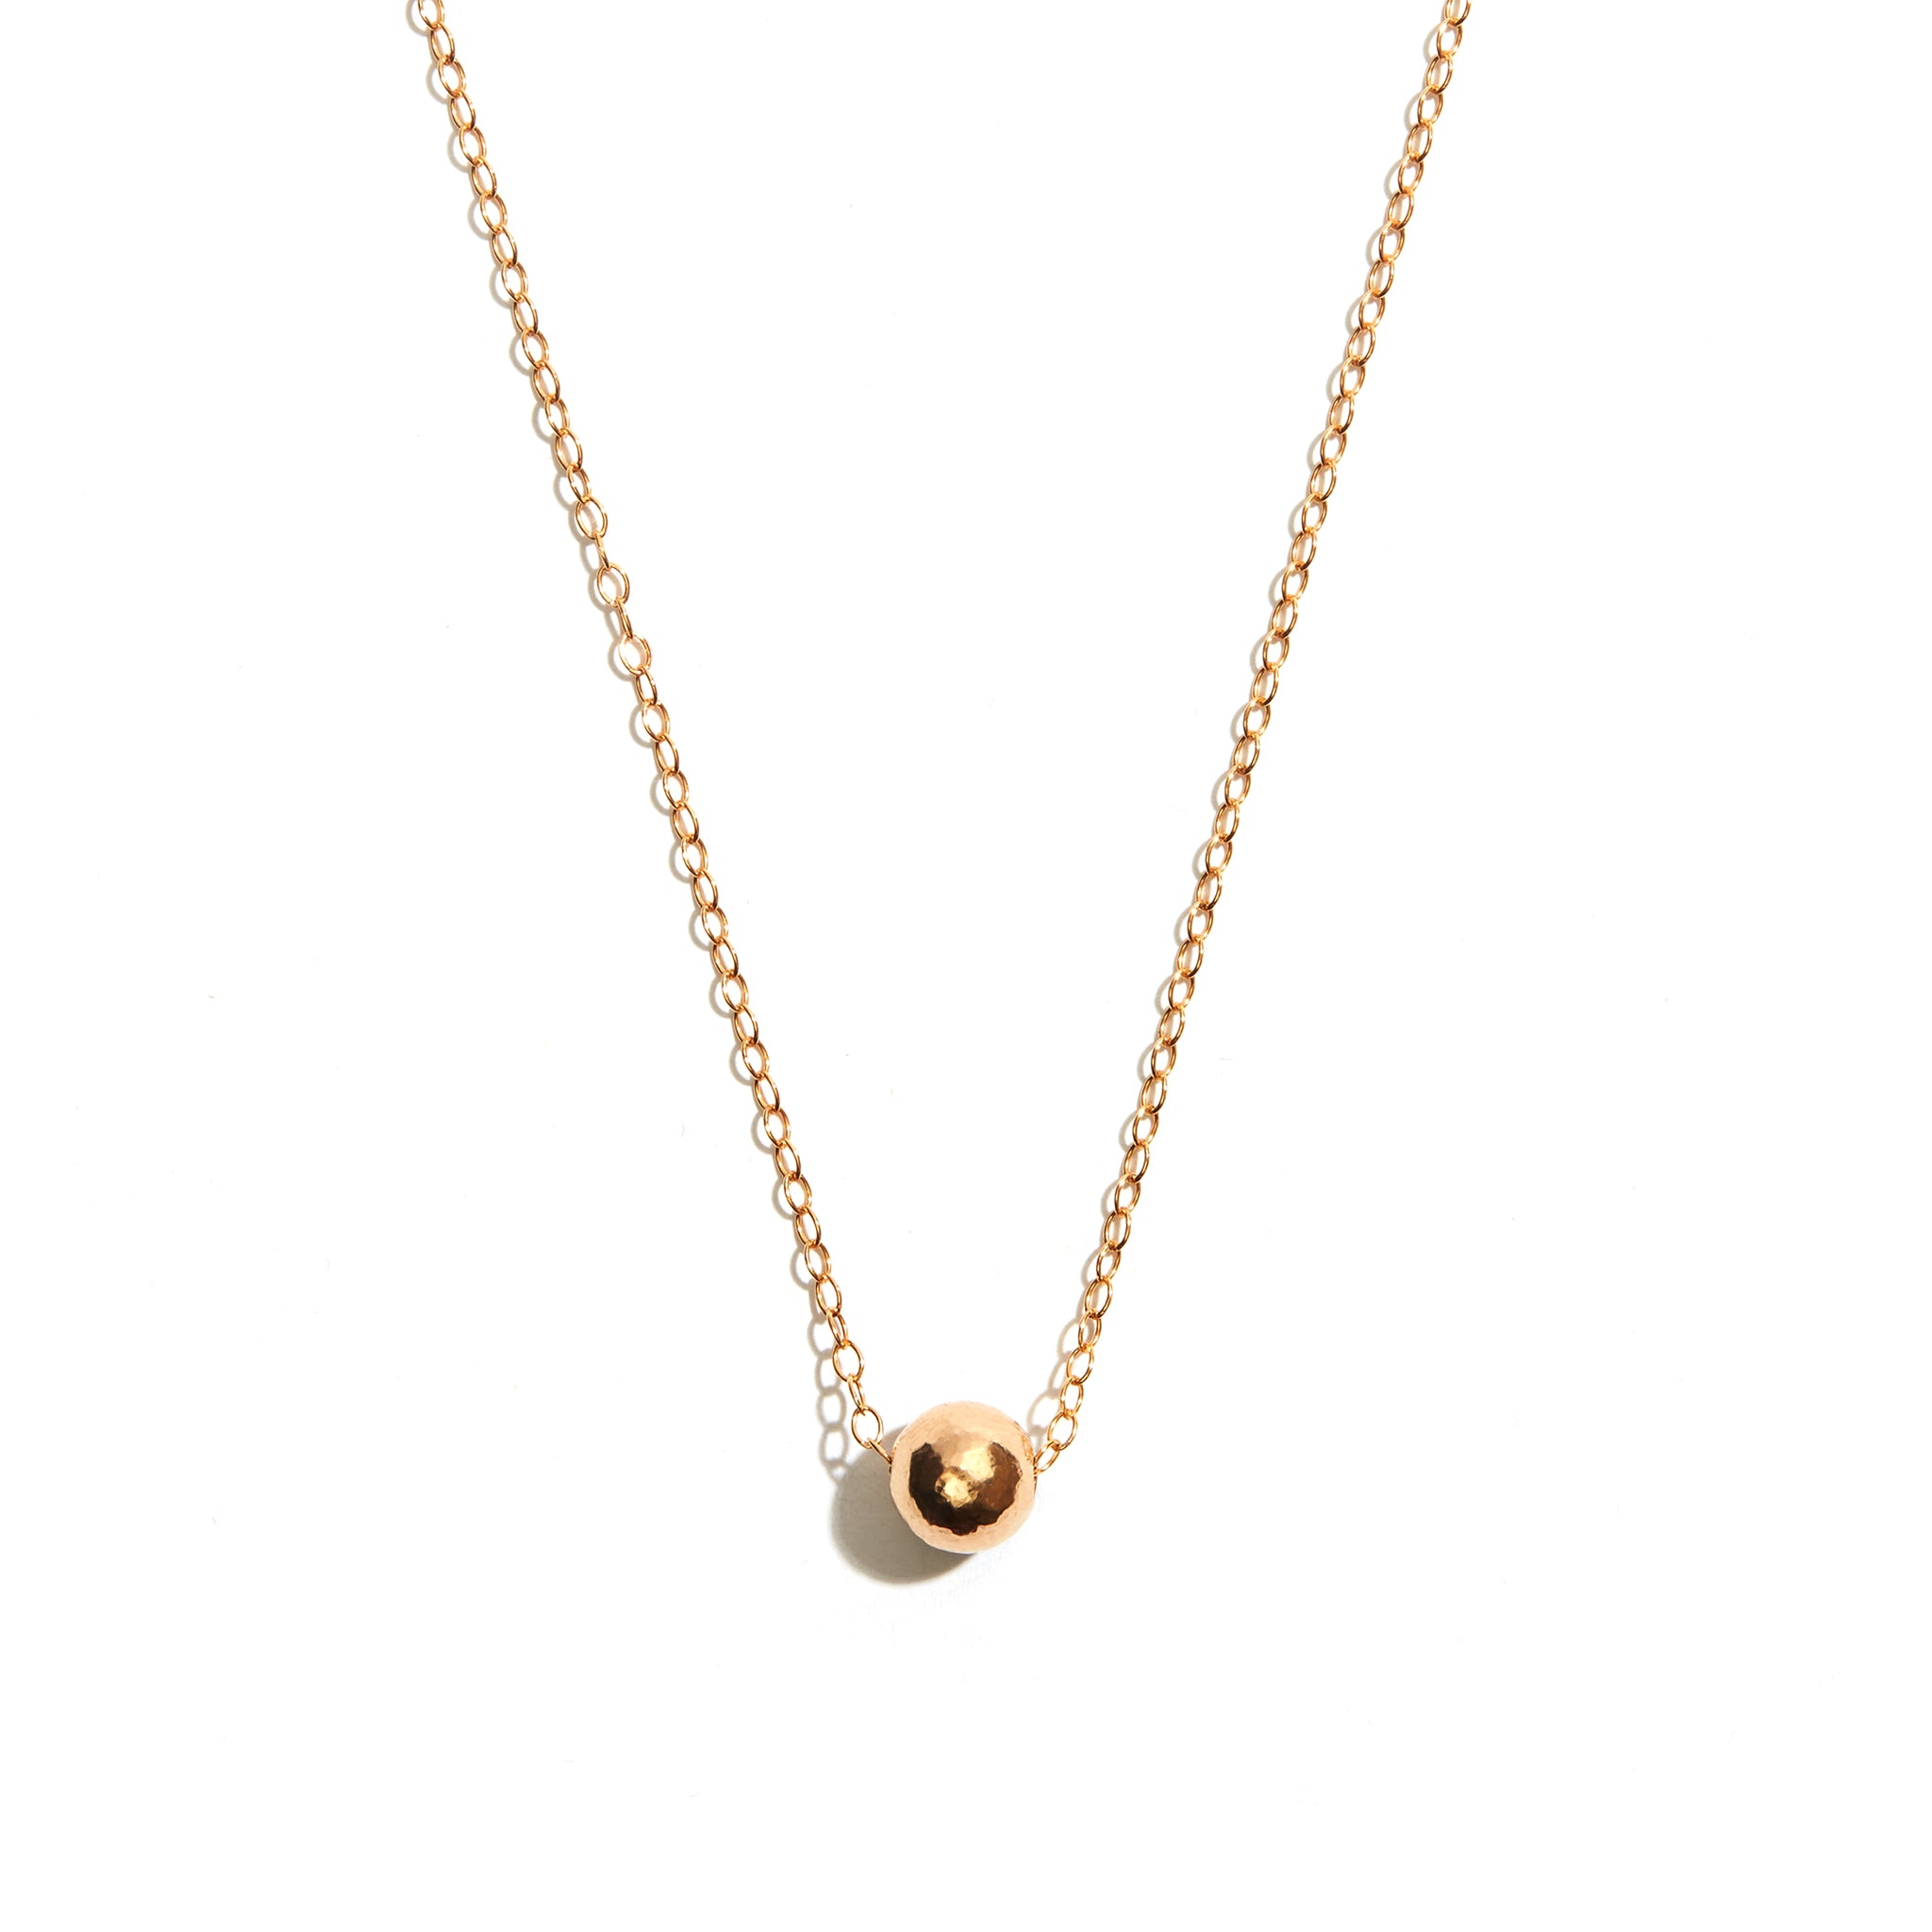 Stunning Hammered Gold Ball Pendant crafted from 14 carat gold-fill, radiating timeless sophistication and charm.